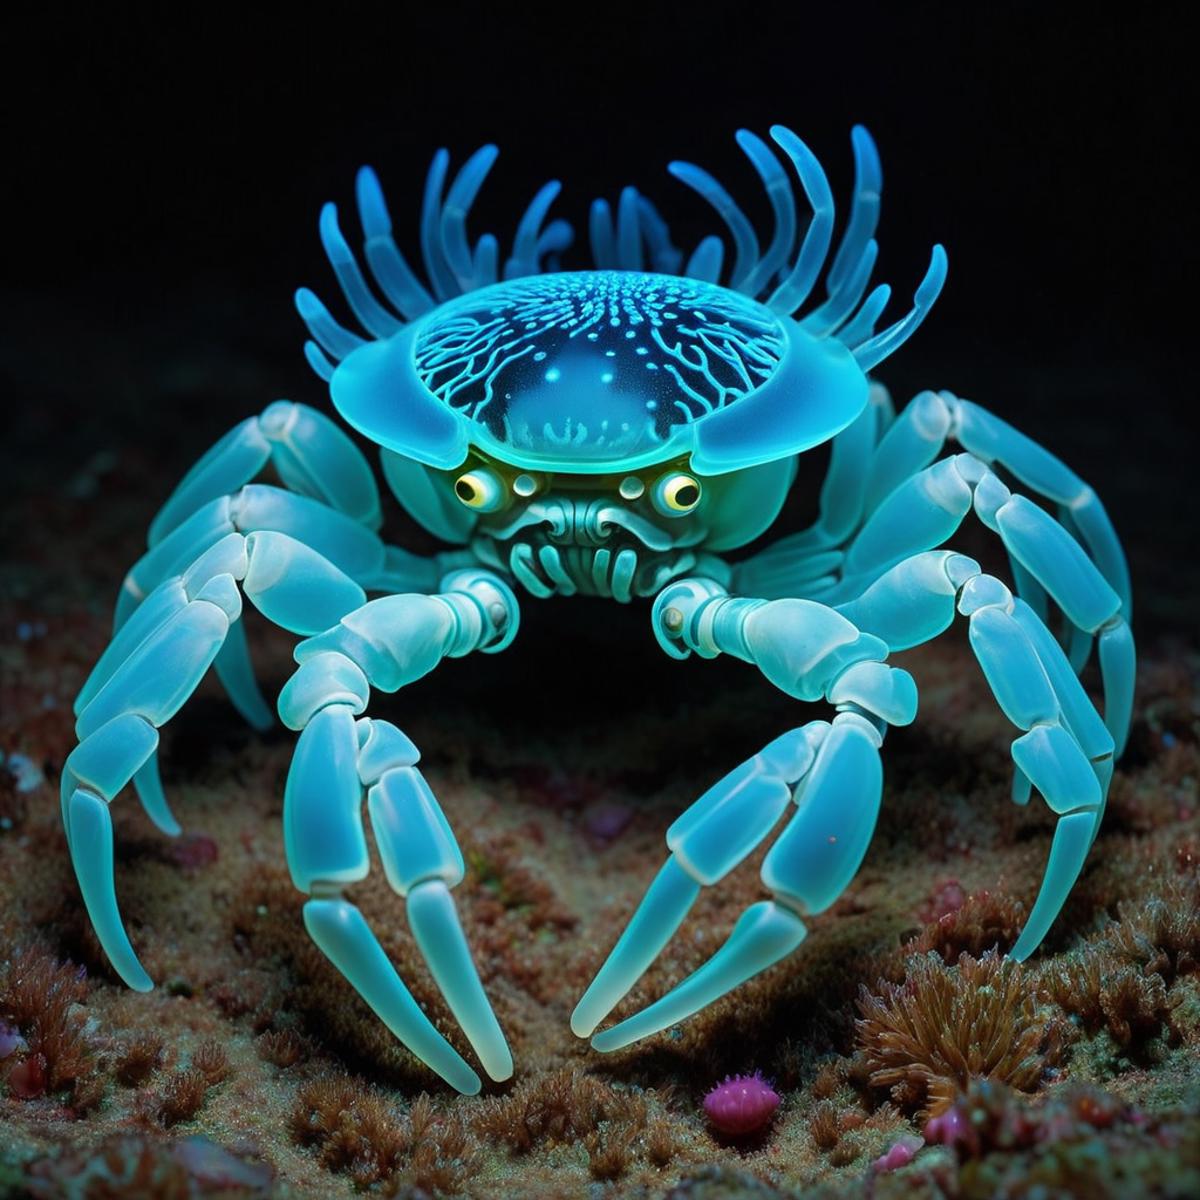 A brightly lit blue sea crab with a pink shell, sitting on a coral reef.